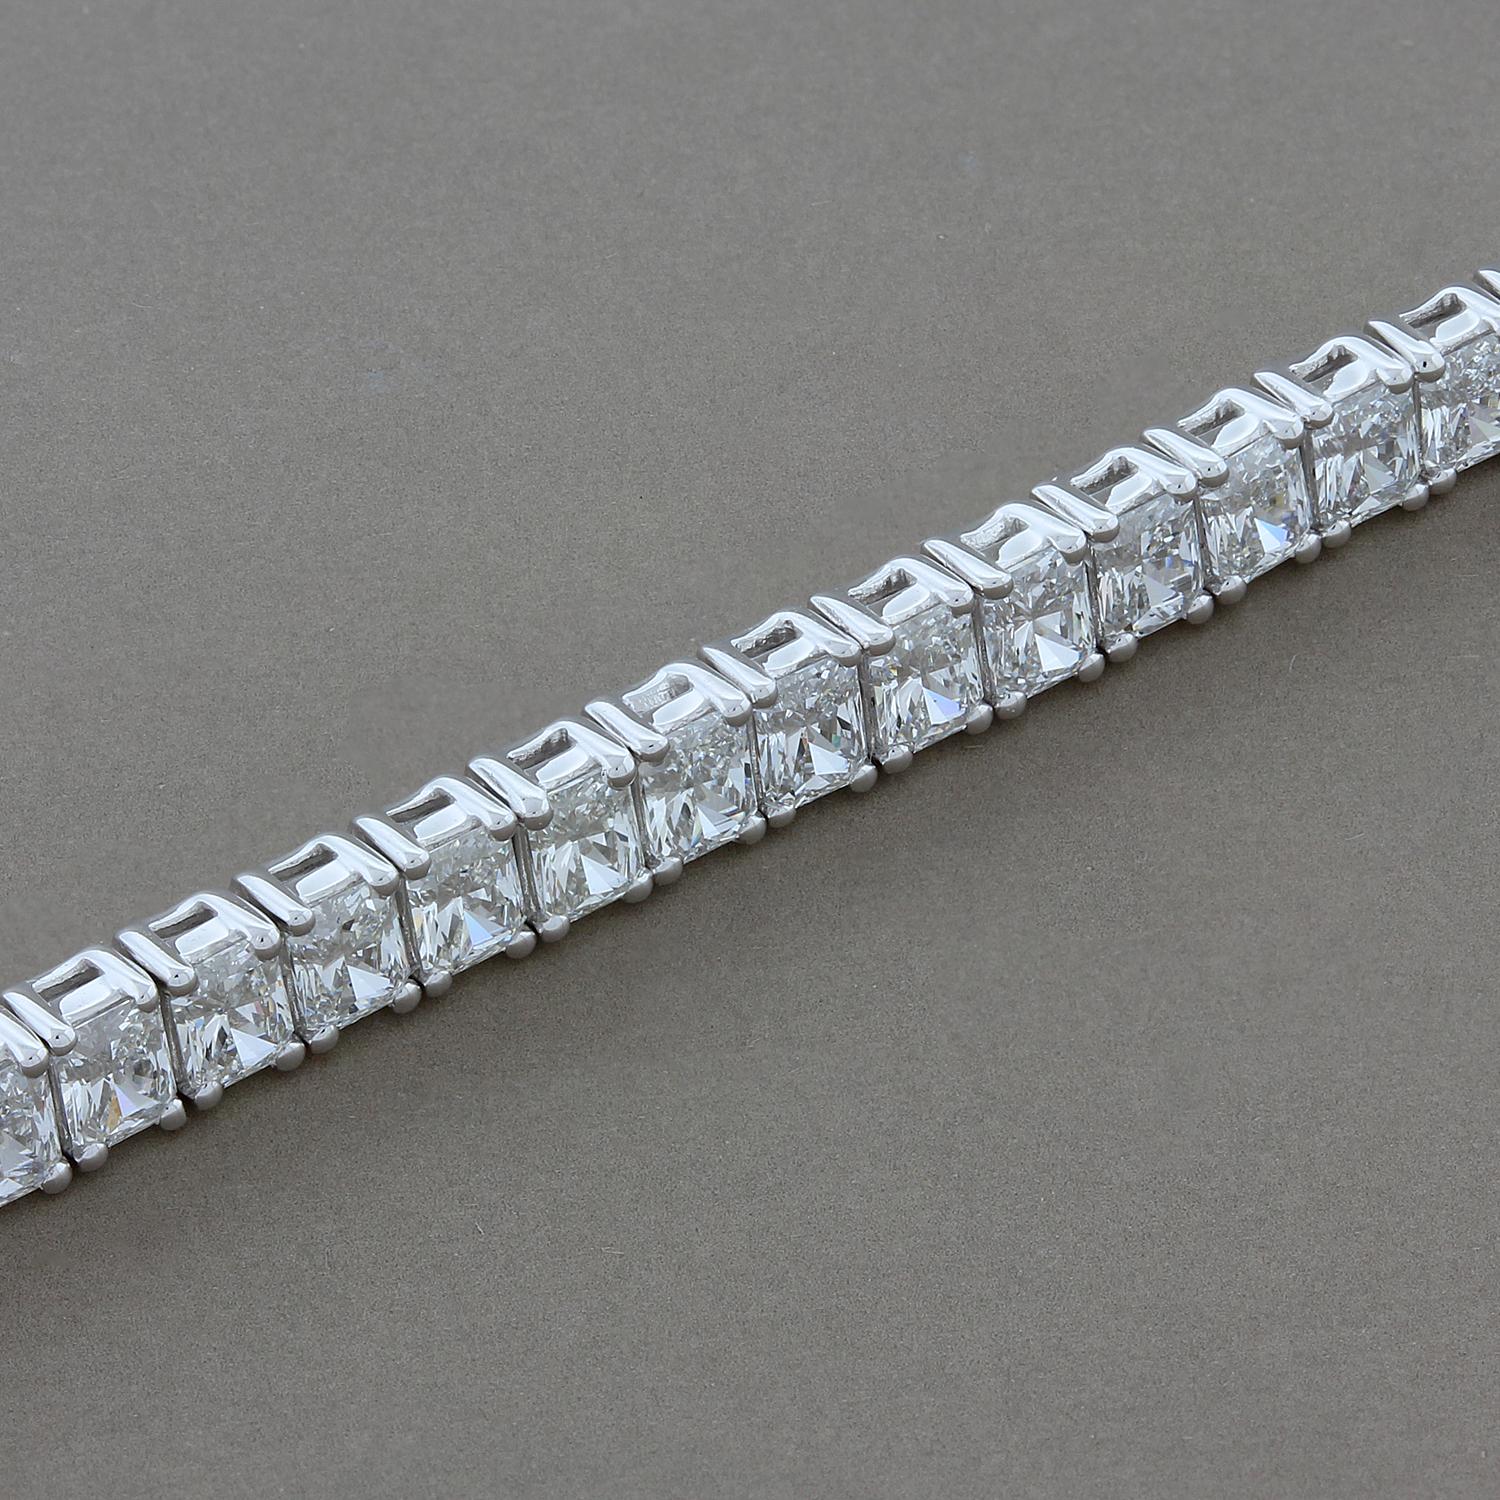 A modern tennis bracelet featuring 9.06 carats of VS quality diamonds. Each radiant cut diamond matching in color and prong set in 18K white gold. The box clasp closure with safety latch ensure for a secure closure.

Fits wrists up to 7 ¼ inches
